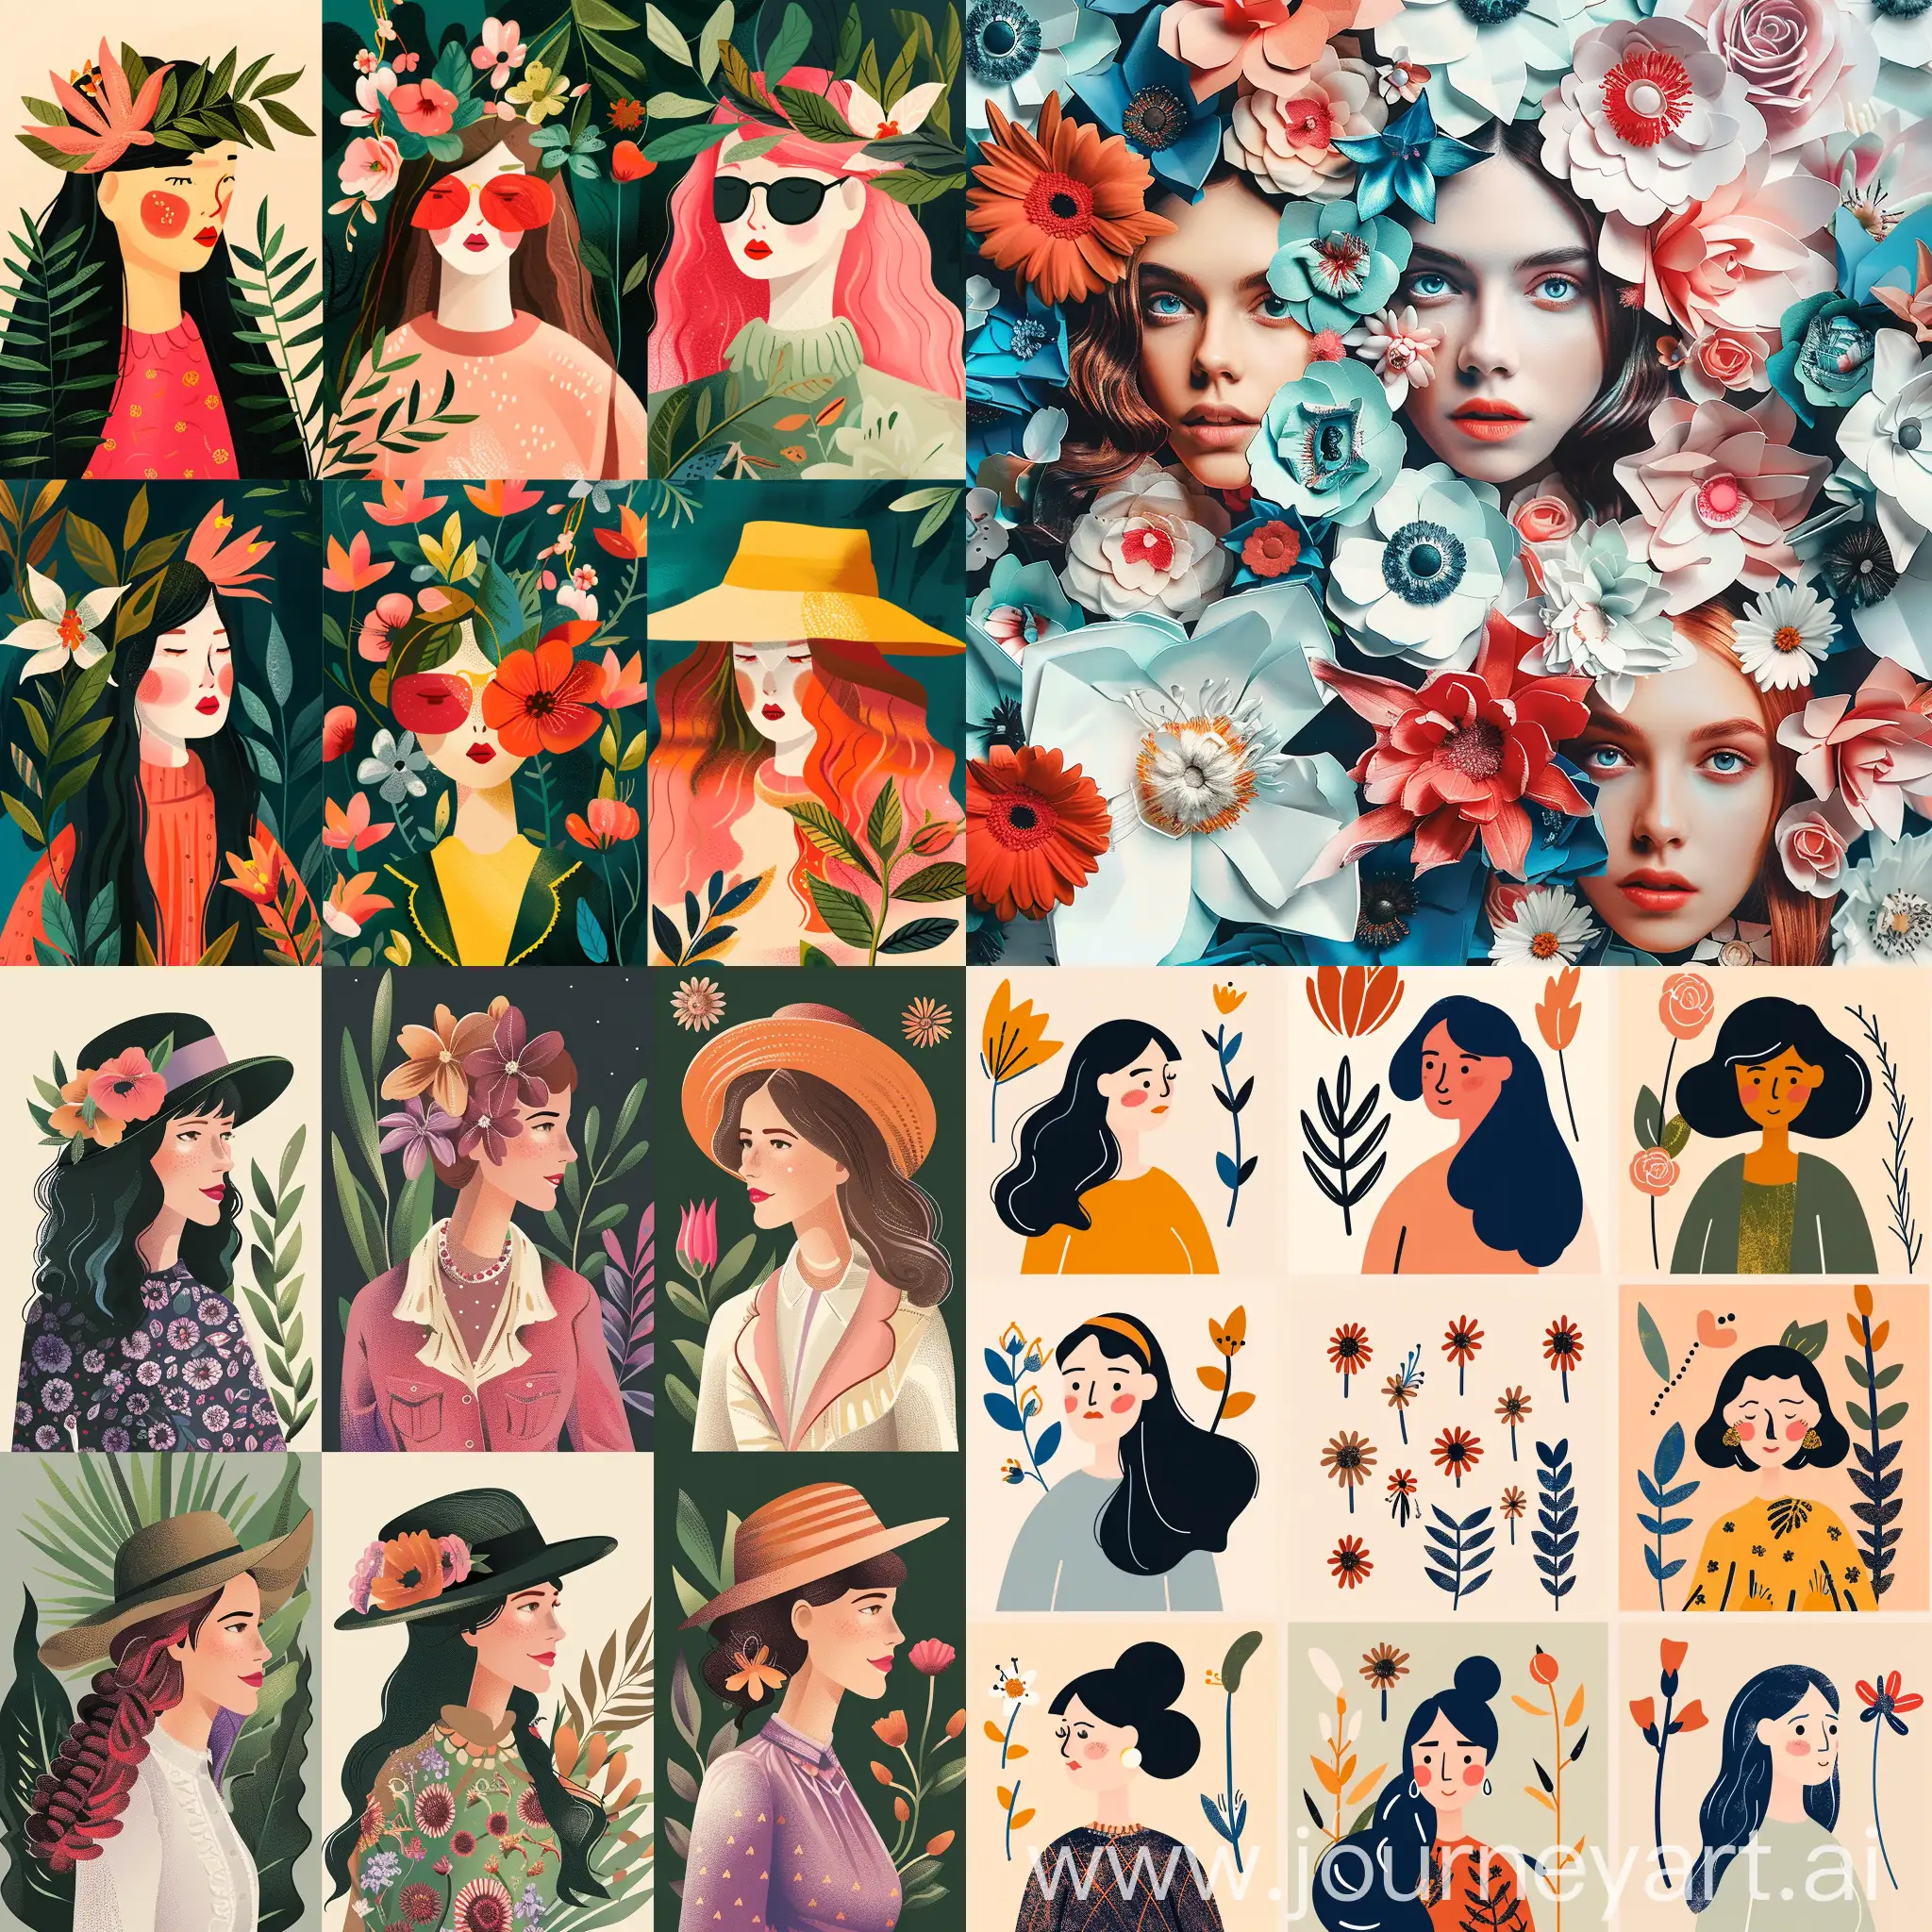 Women-Holding-Bouquets-Vibrant-Collage-Art-in-Flat-Style